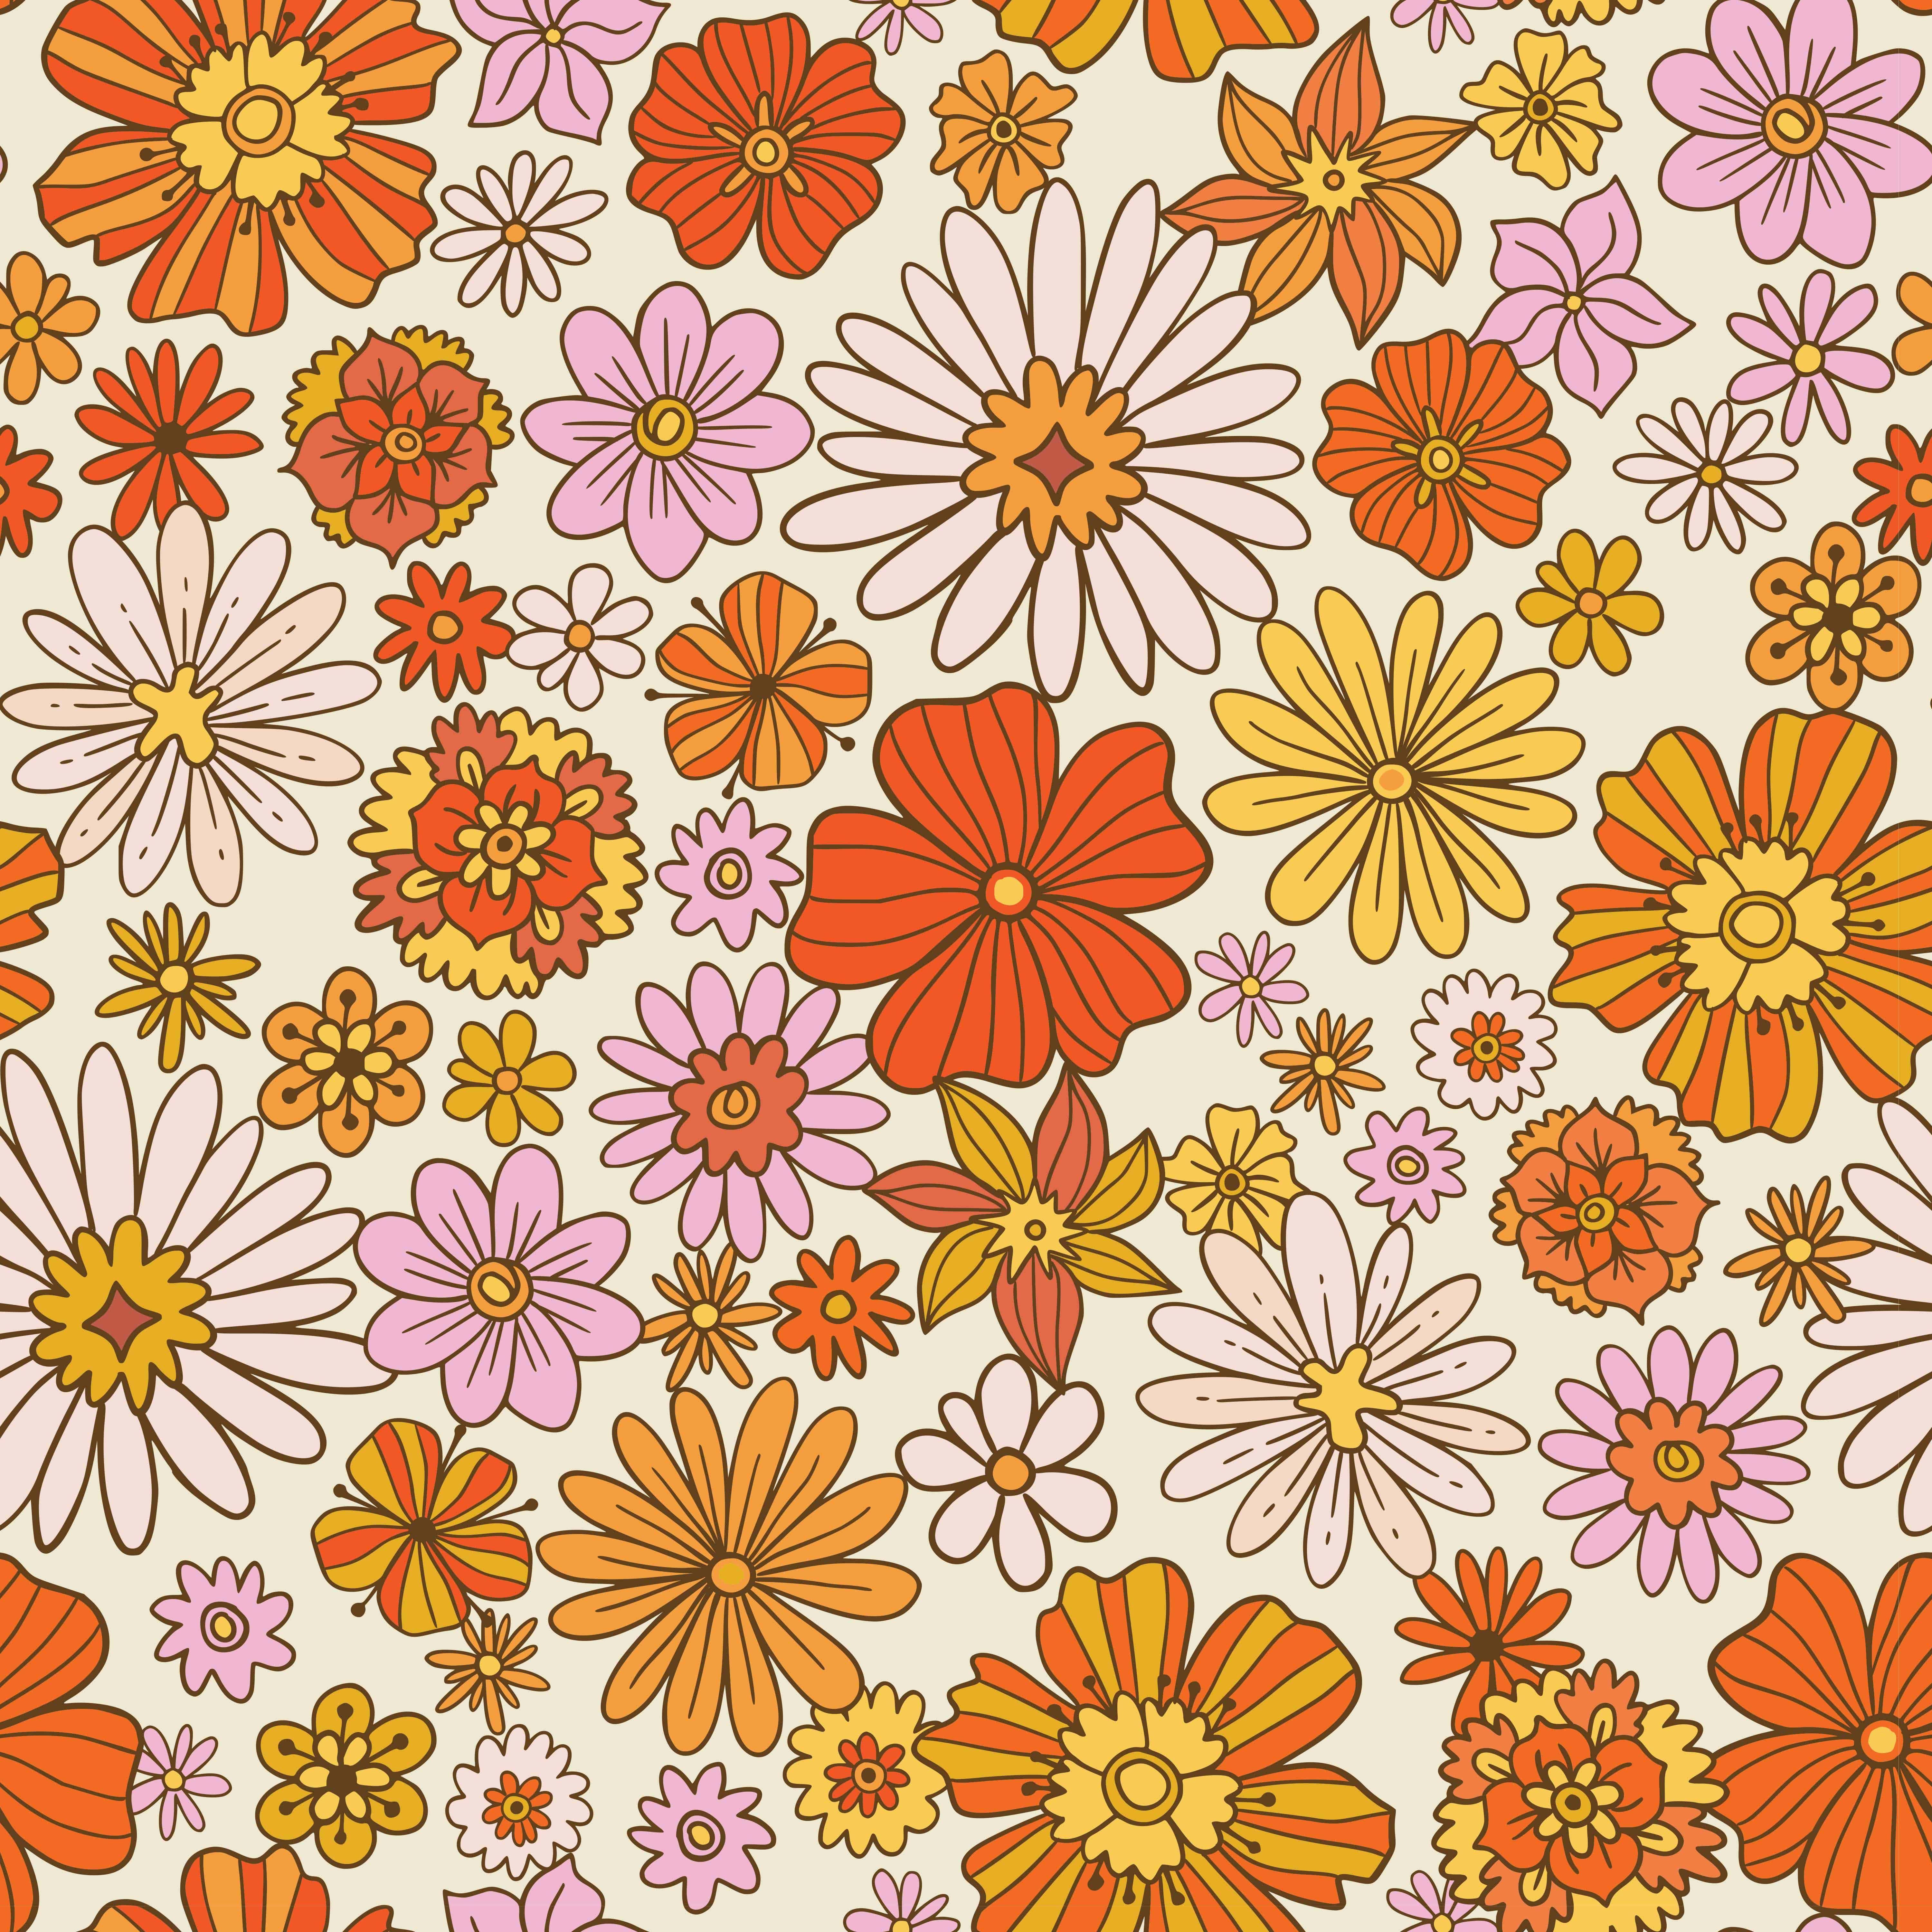 A seamless pattern of orange and pink flowers - 70s